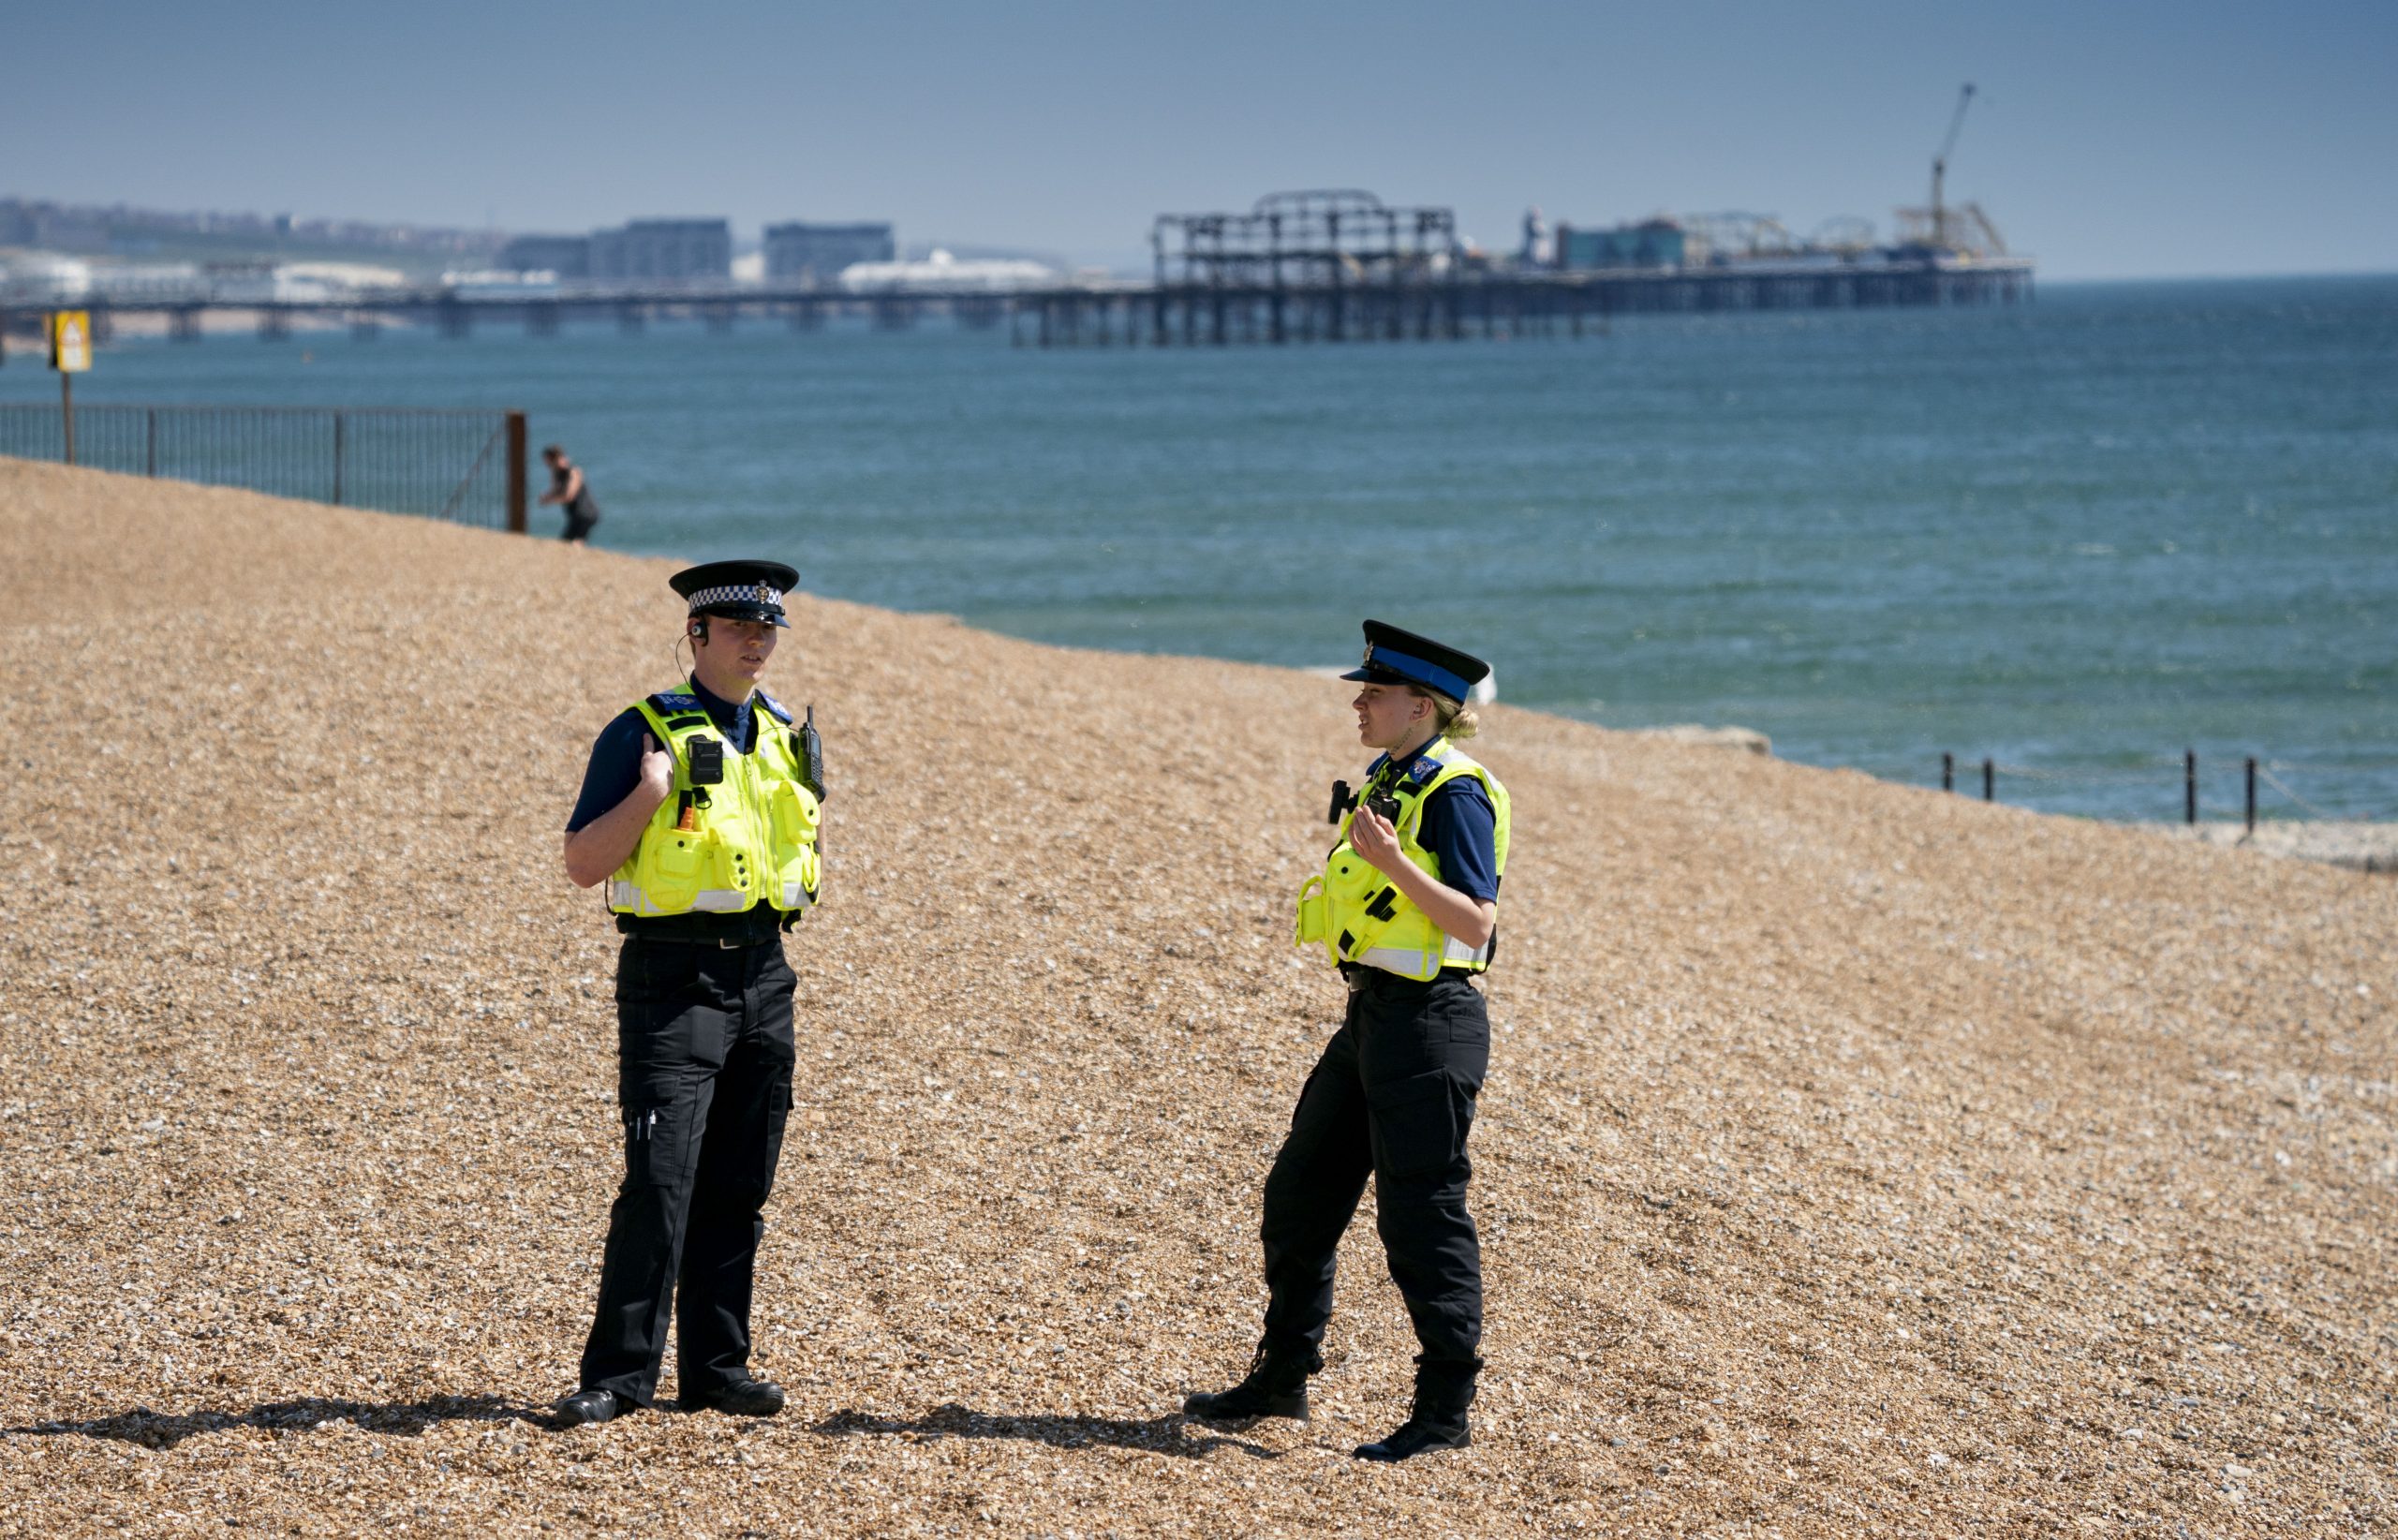 Horror as woman is sexually assaulted at popular beach after being approached by stranger who asked her to go for a swim